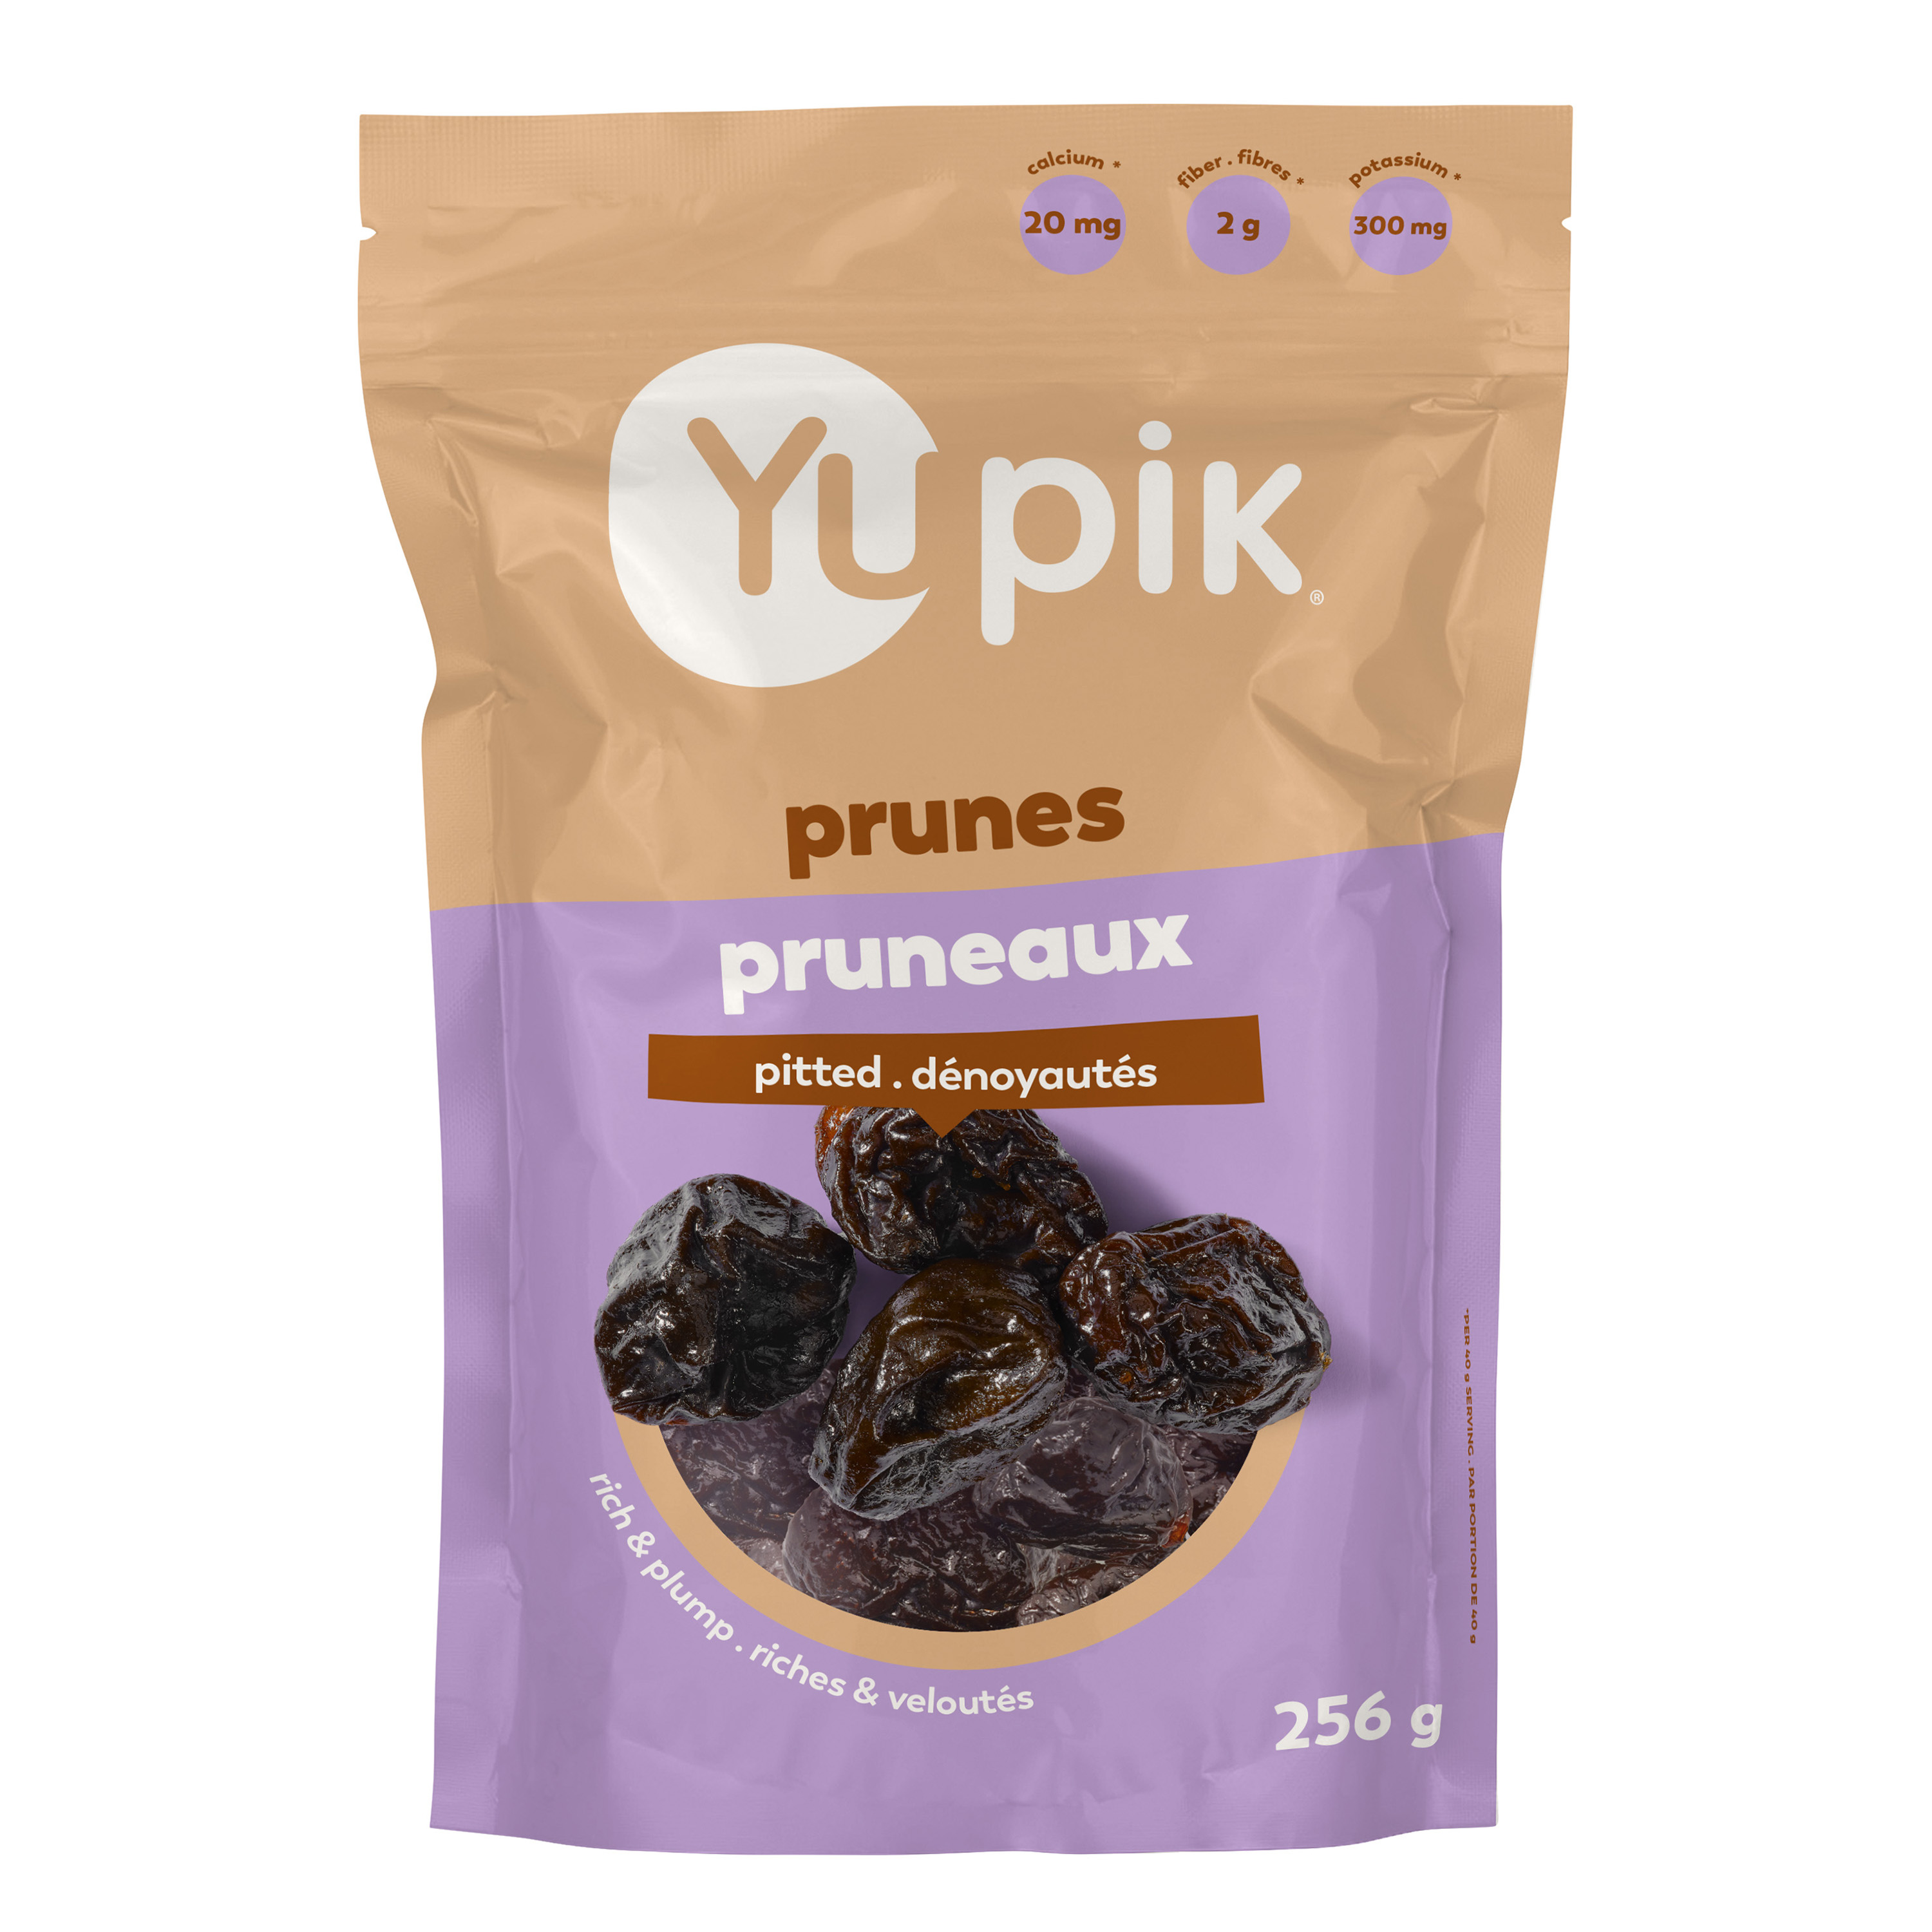 Prunes, Potassium sorbate, Sunflower oil


MAY CONTAIN OCCASIONALLY PITS OR PIT FRAGMENTS.